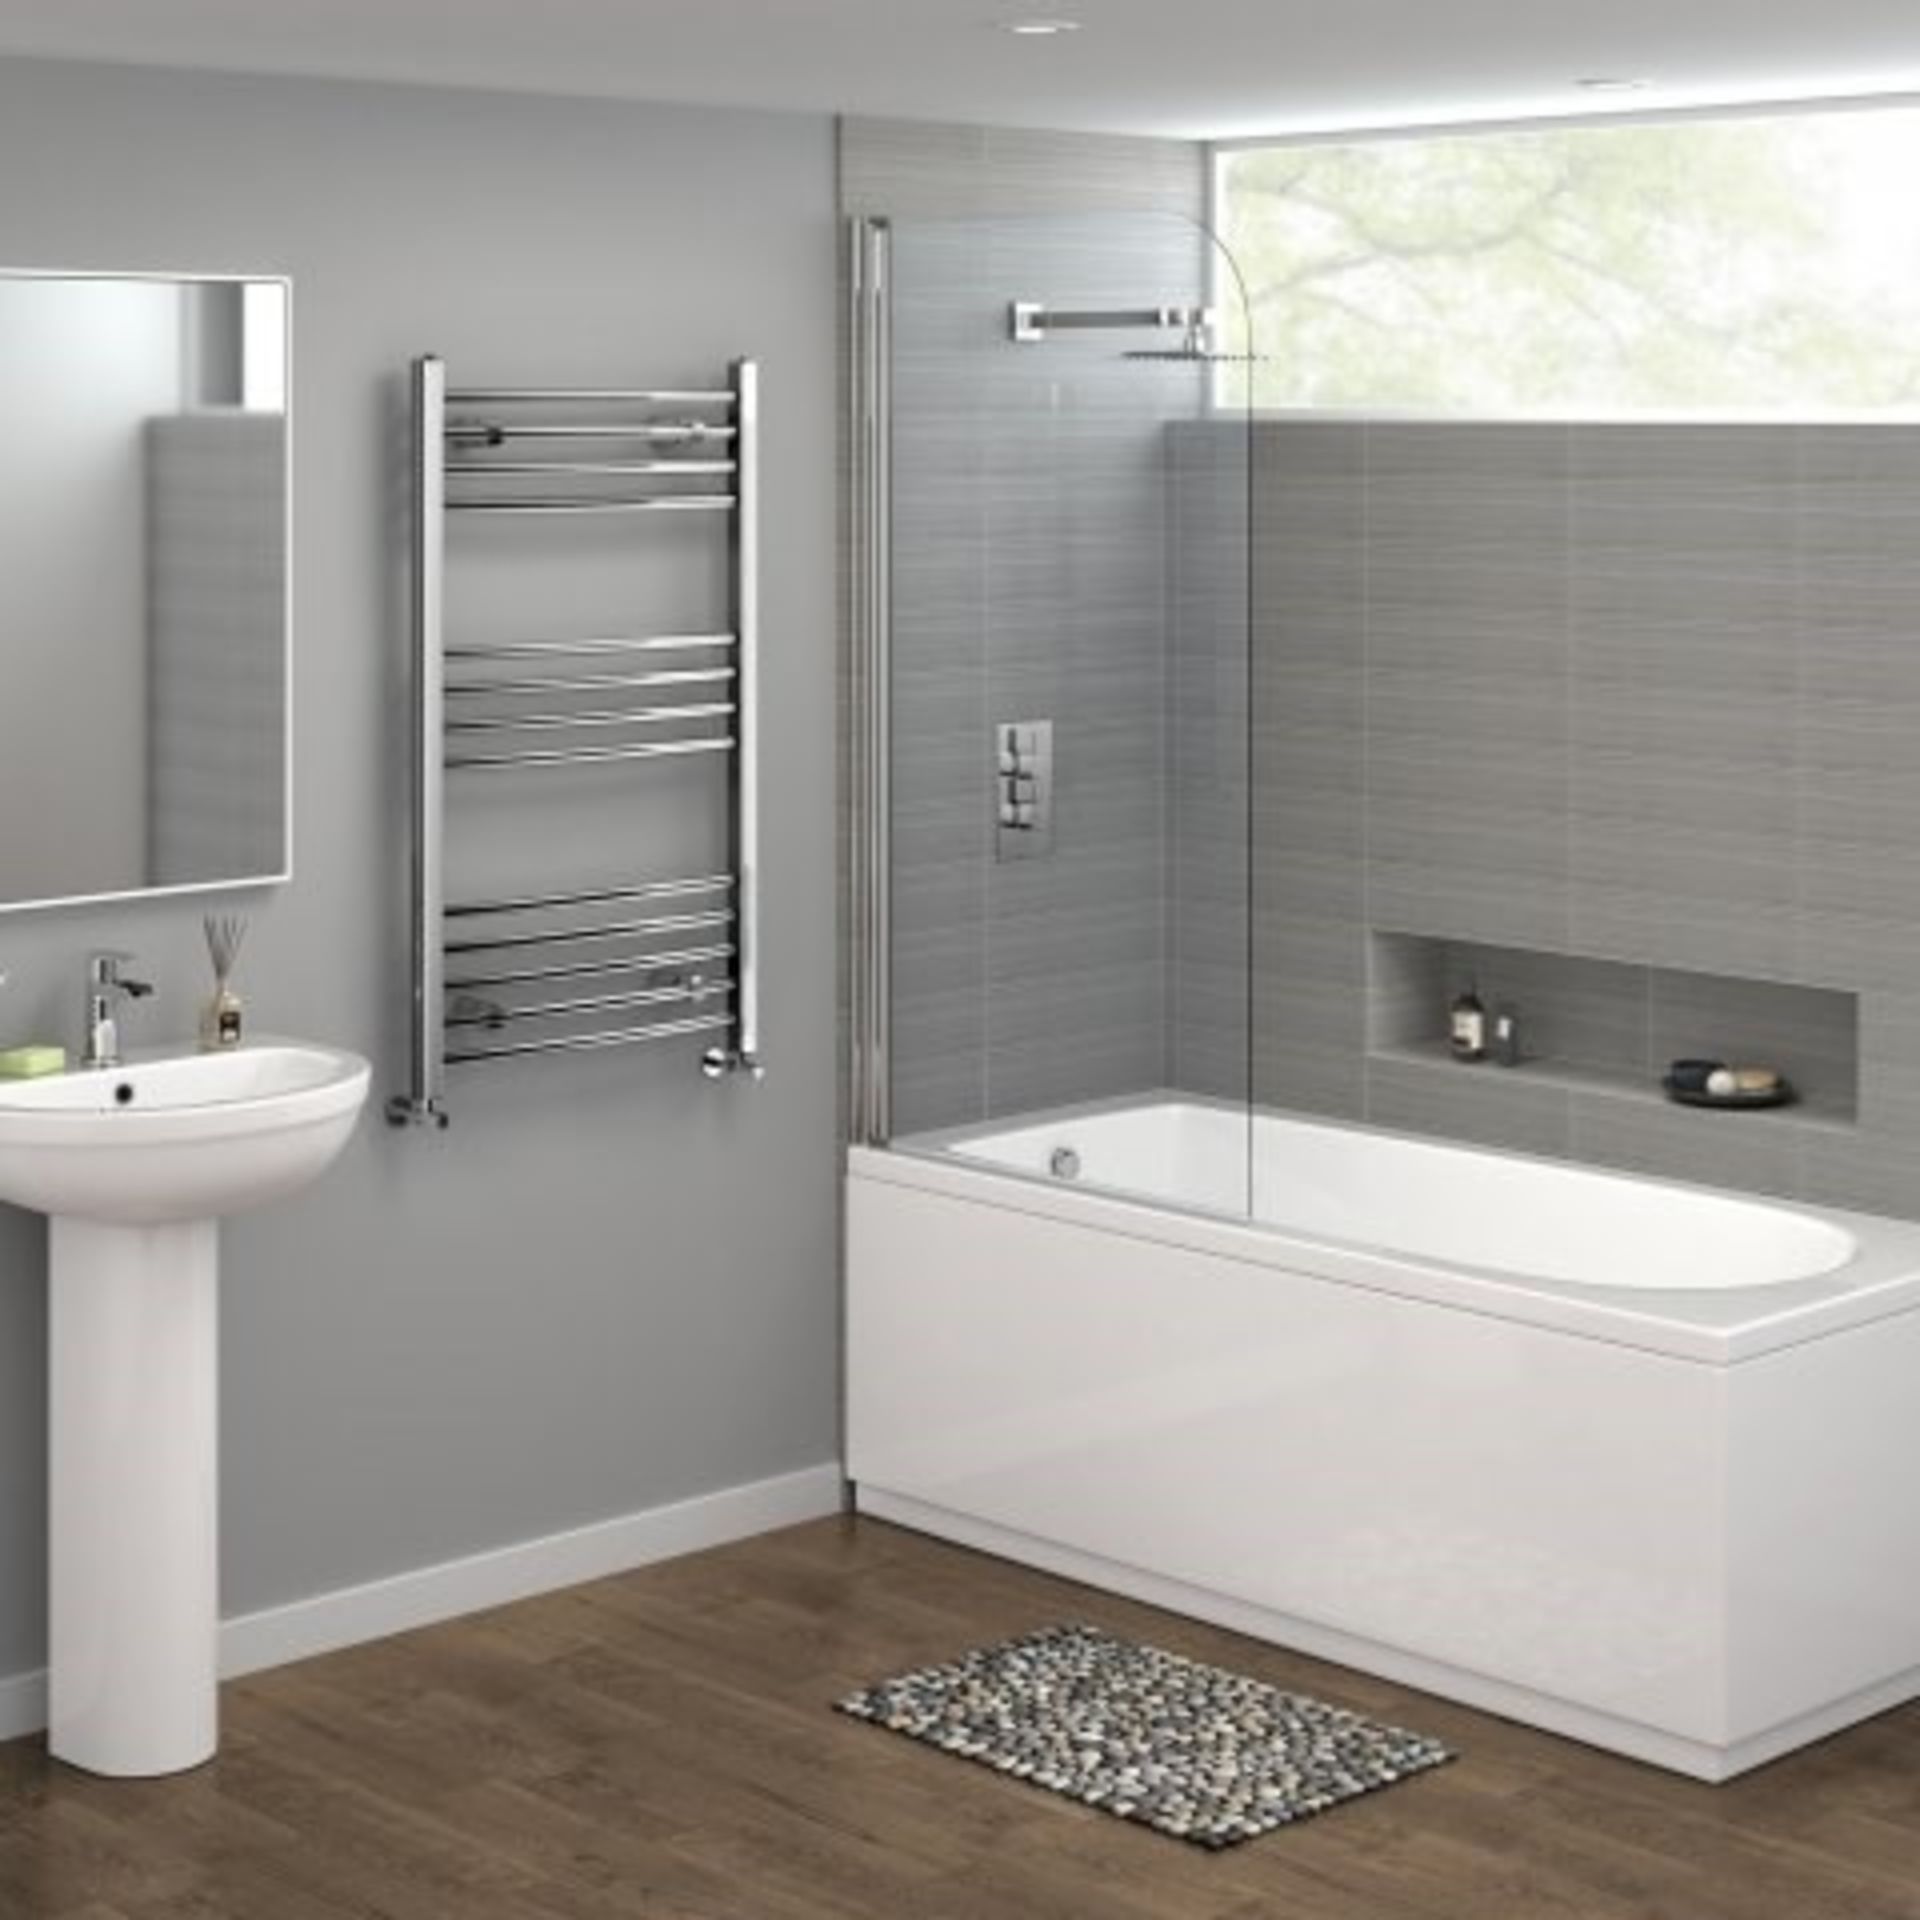 New 1200x500mm - 20mm Tubes - Rrp £219.99.Chrome Curved Rail Ladder Towel Radiator.Our Nancy 1... - Image 2 of 2